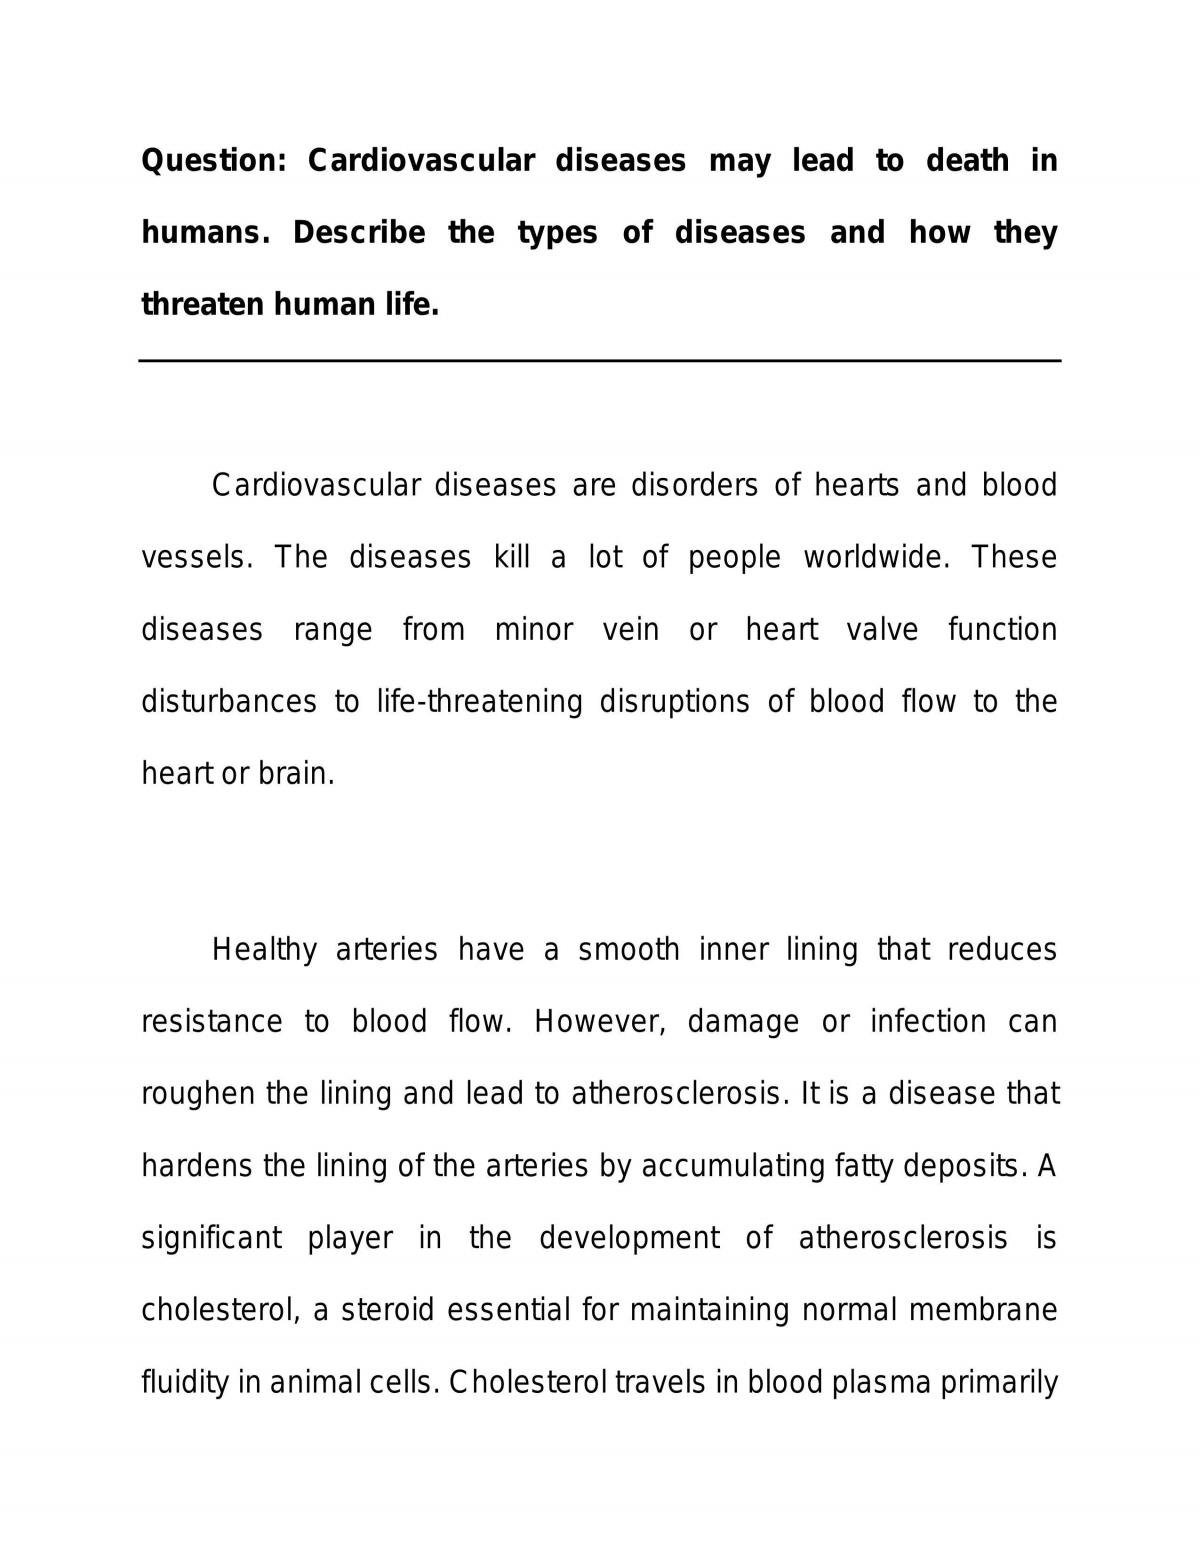 how to start an essay about heart disease